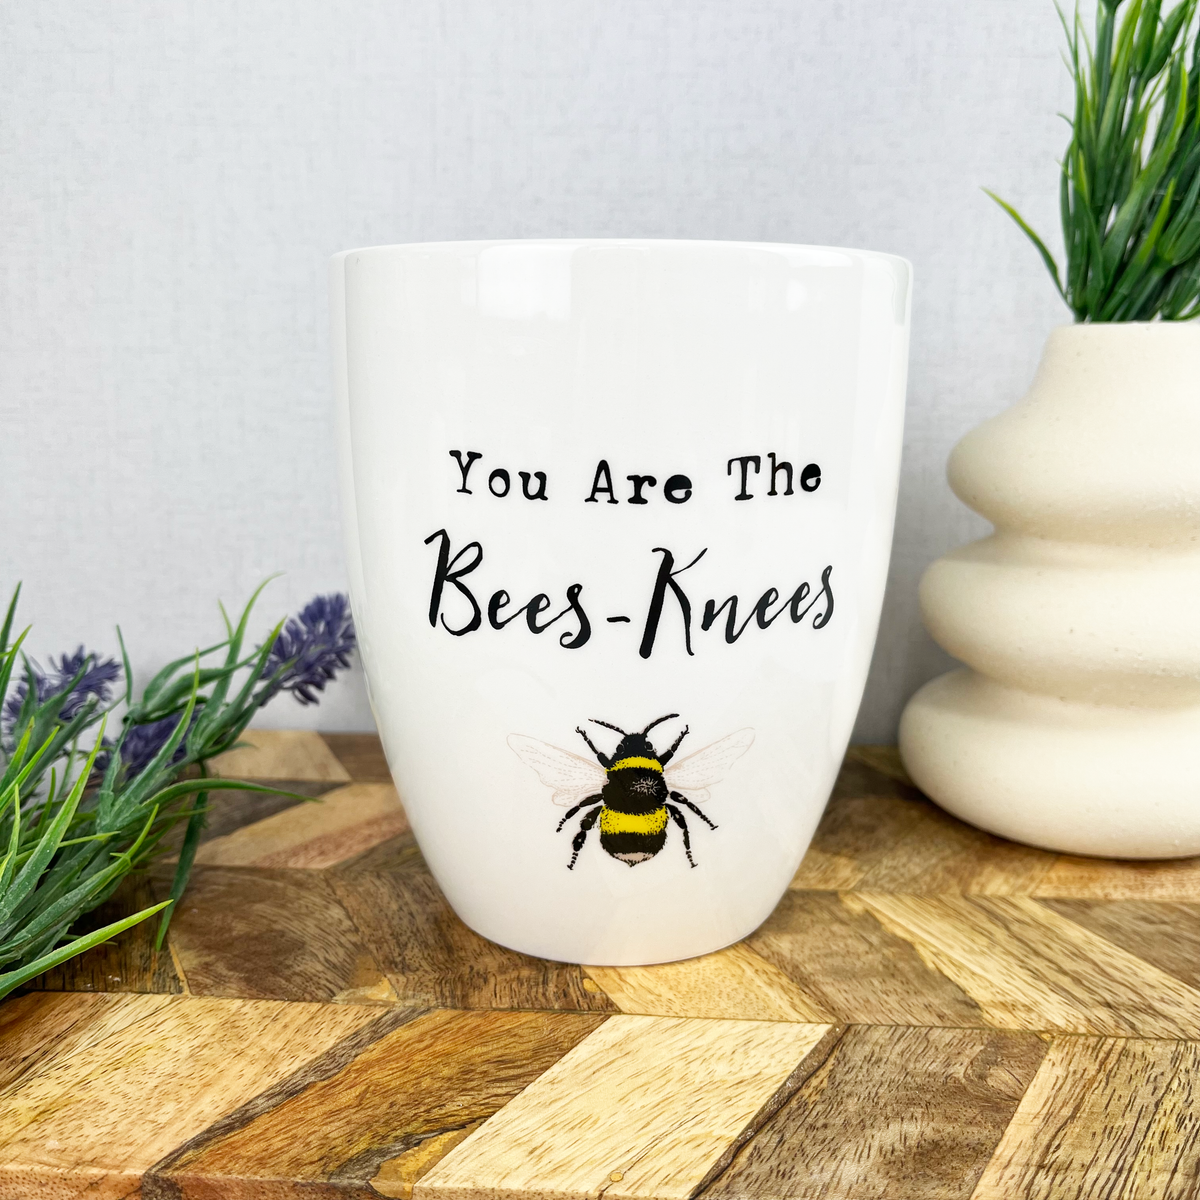 "The Bees Knees" White Ceramic Plant Pot with Bee Design